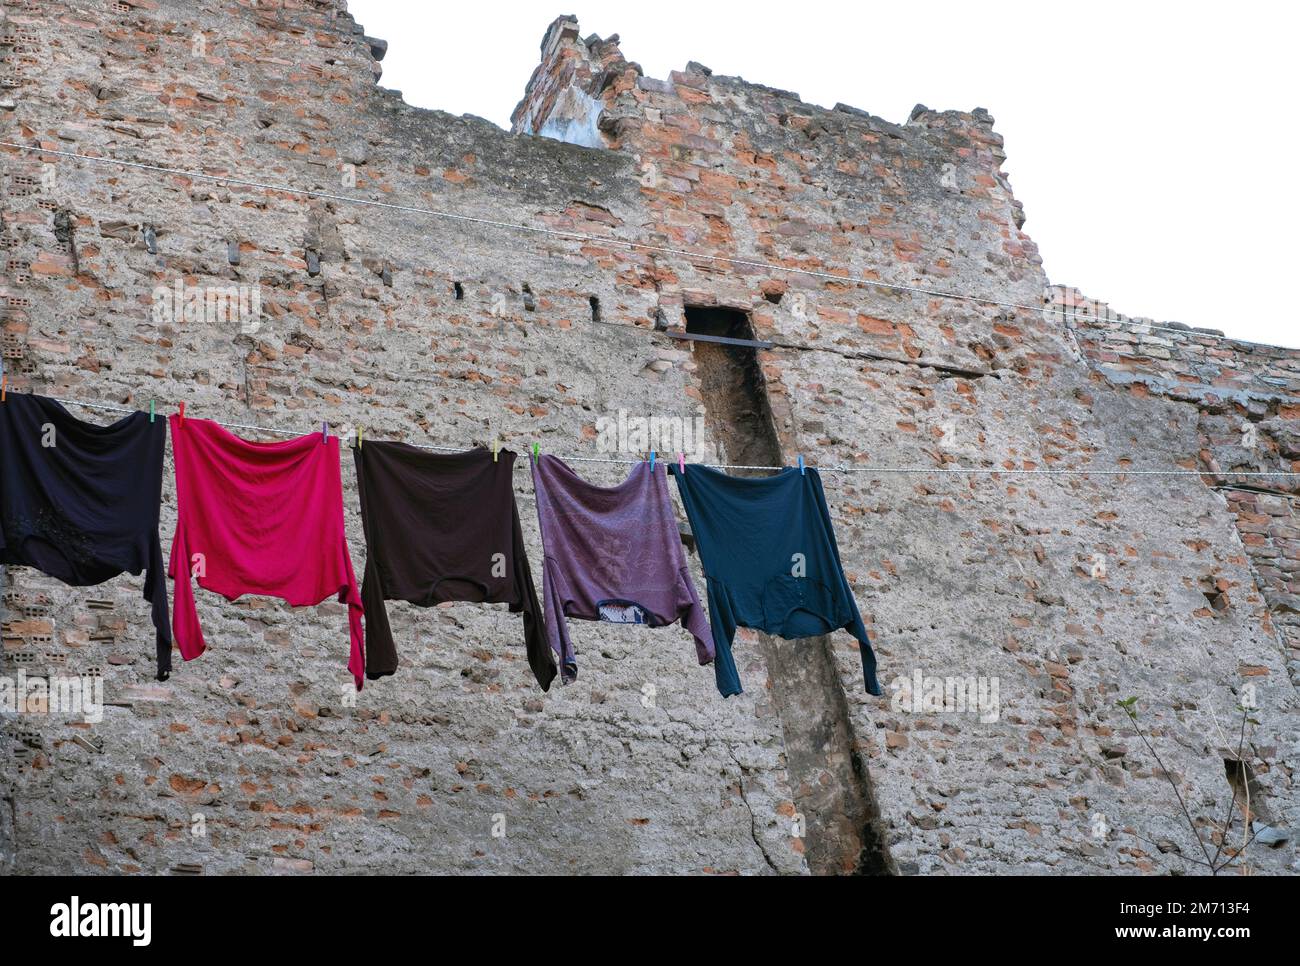 Clothes drying in traditional street and houses at Balat district, Istanbul Stock Photo